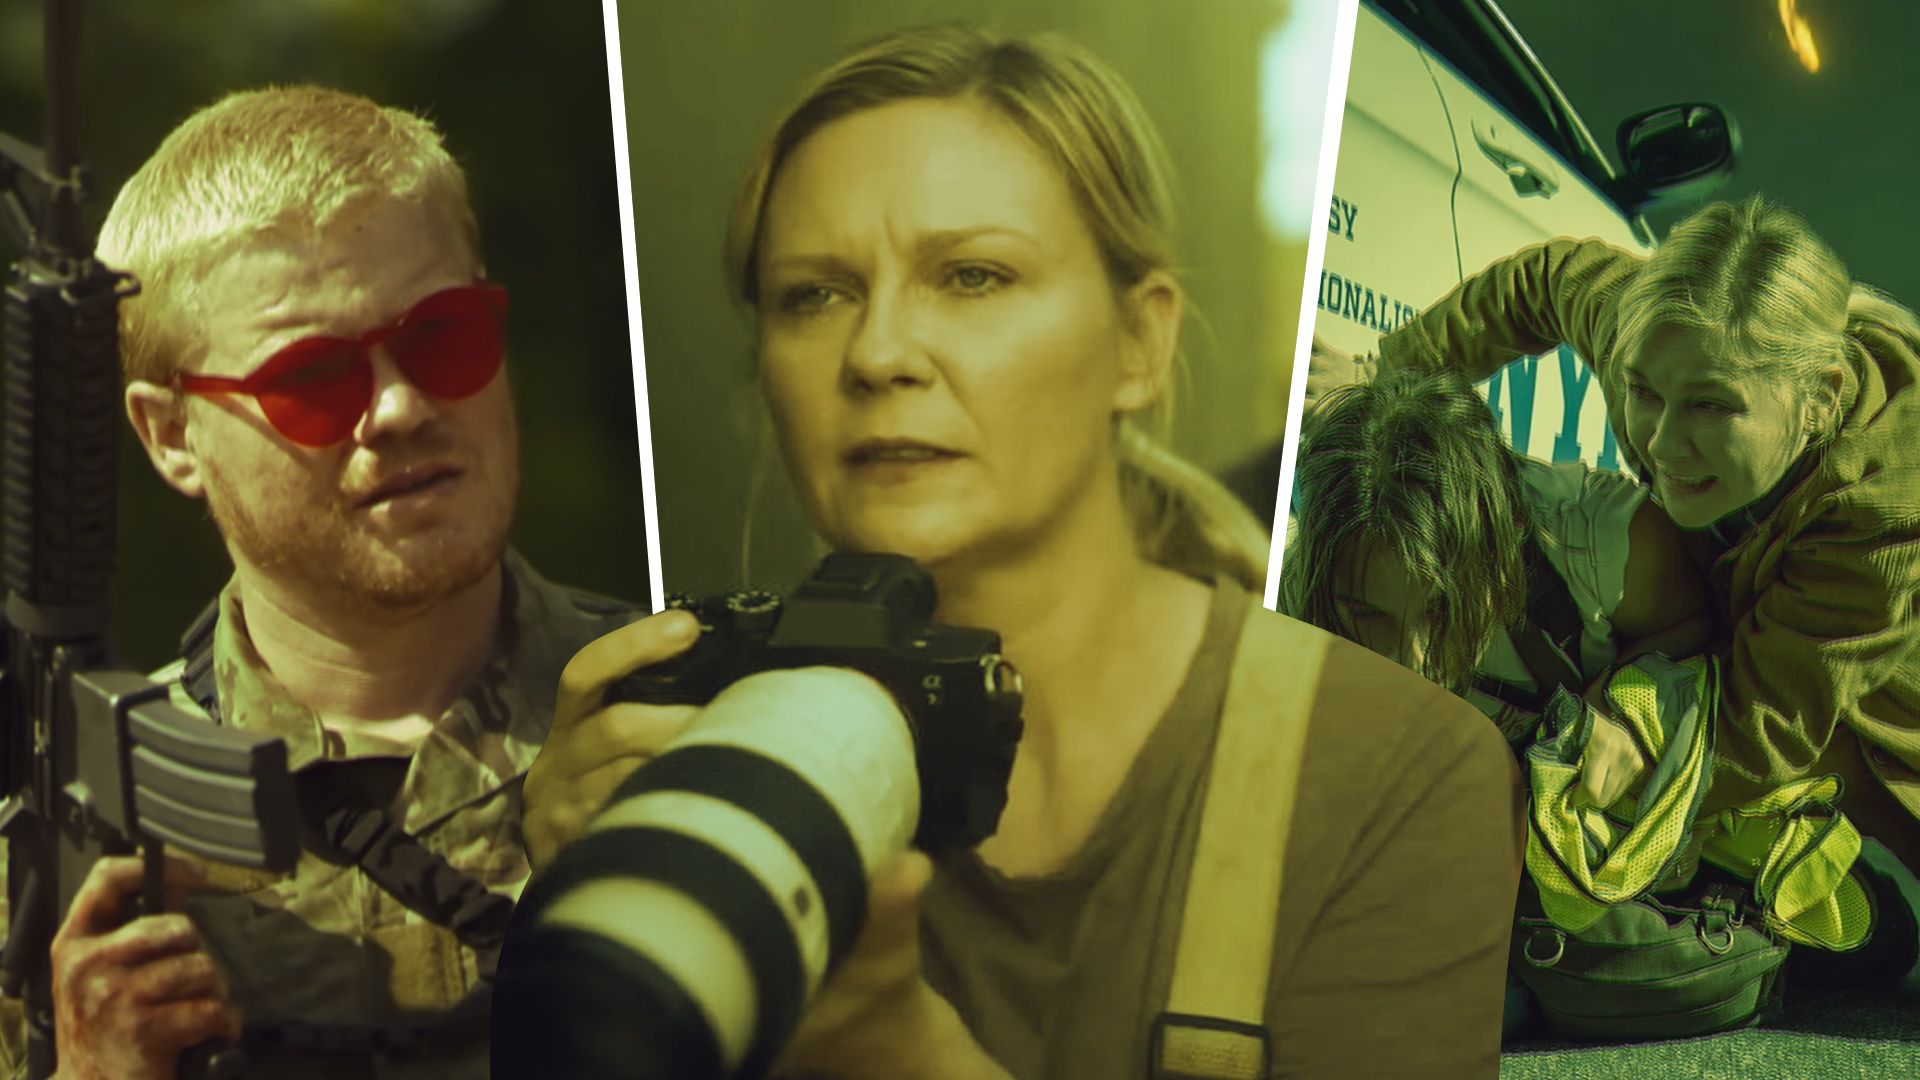 Kirsten Dunst holding a camera and hiding behind a car with Jesse Plemons holding a rifle in an edited image of Civil War